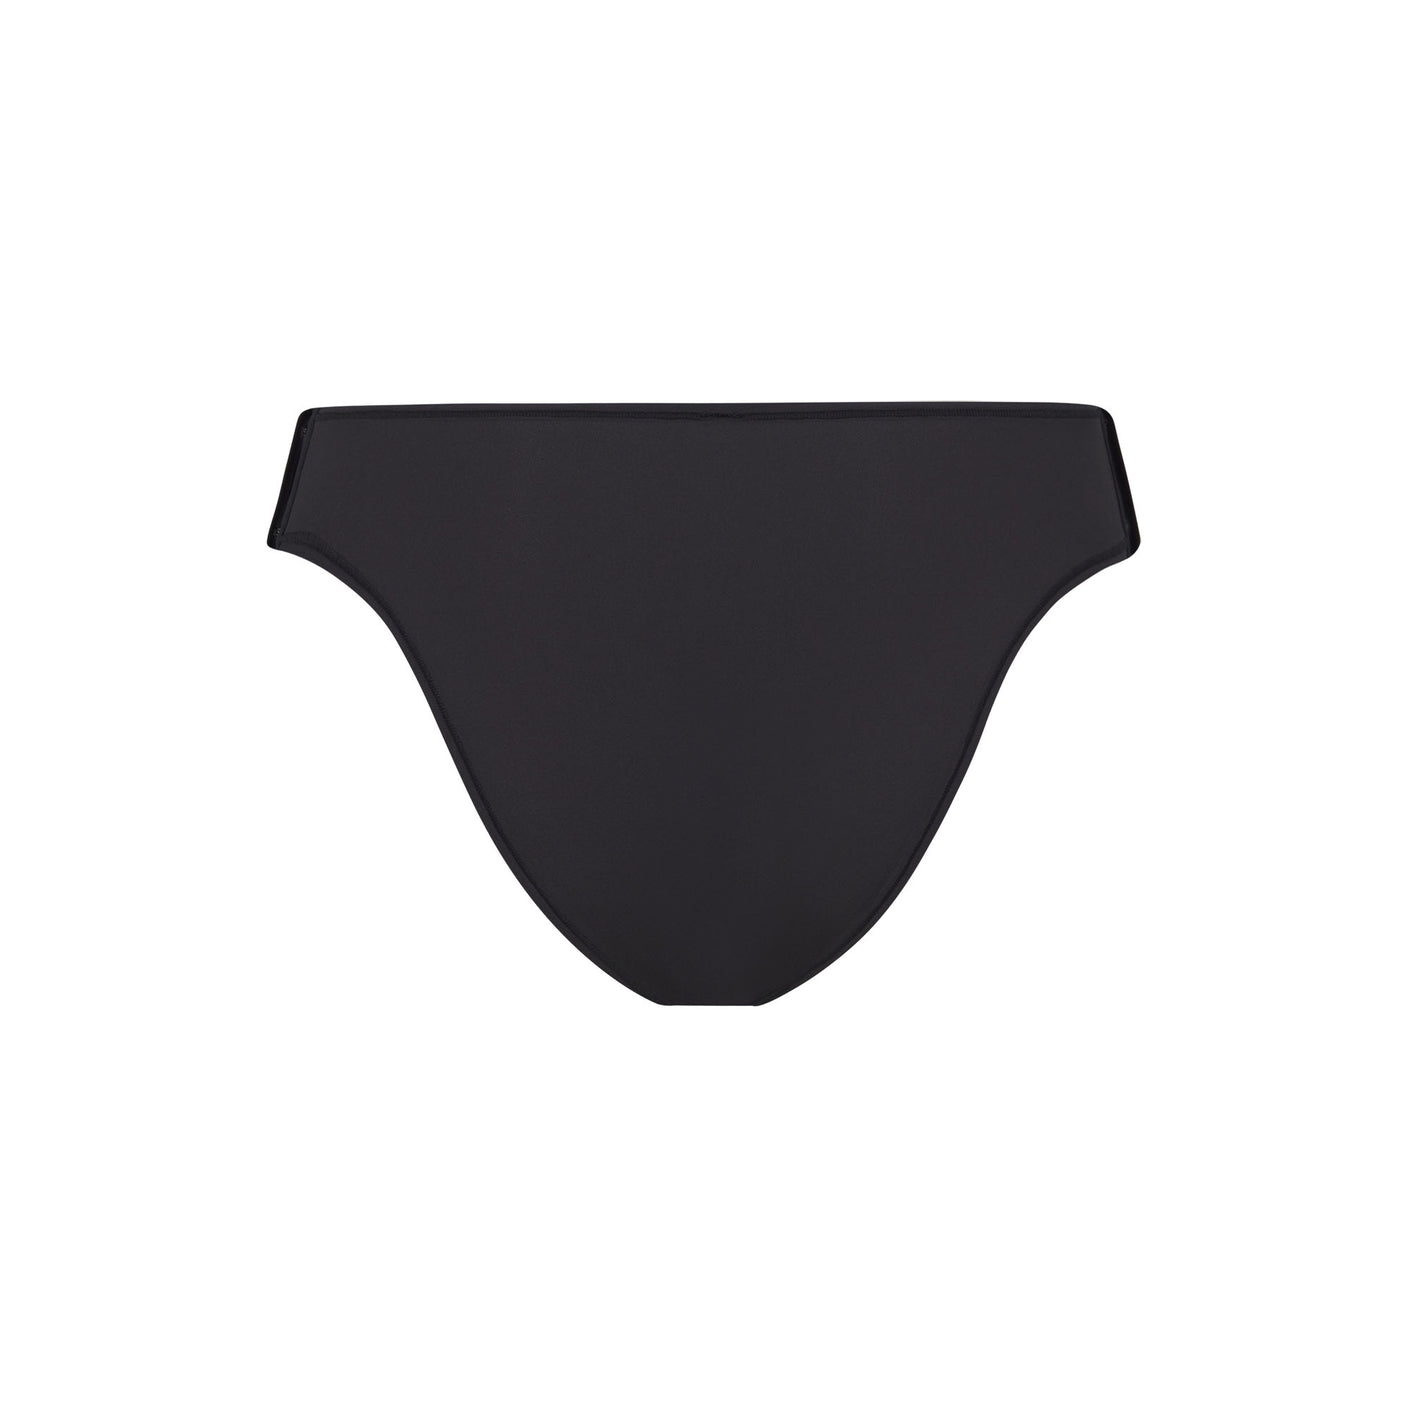 Why Adaptive Underwear, Our Story